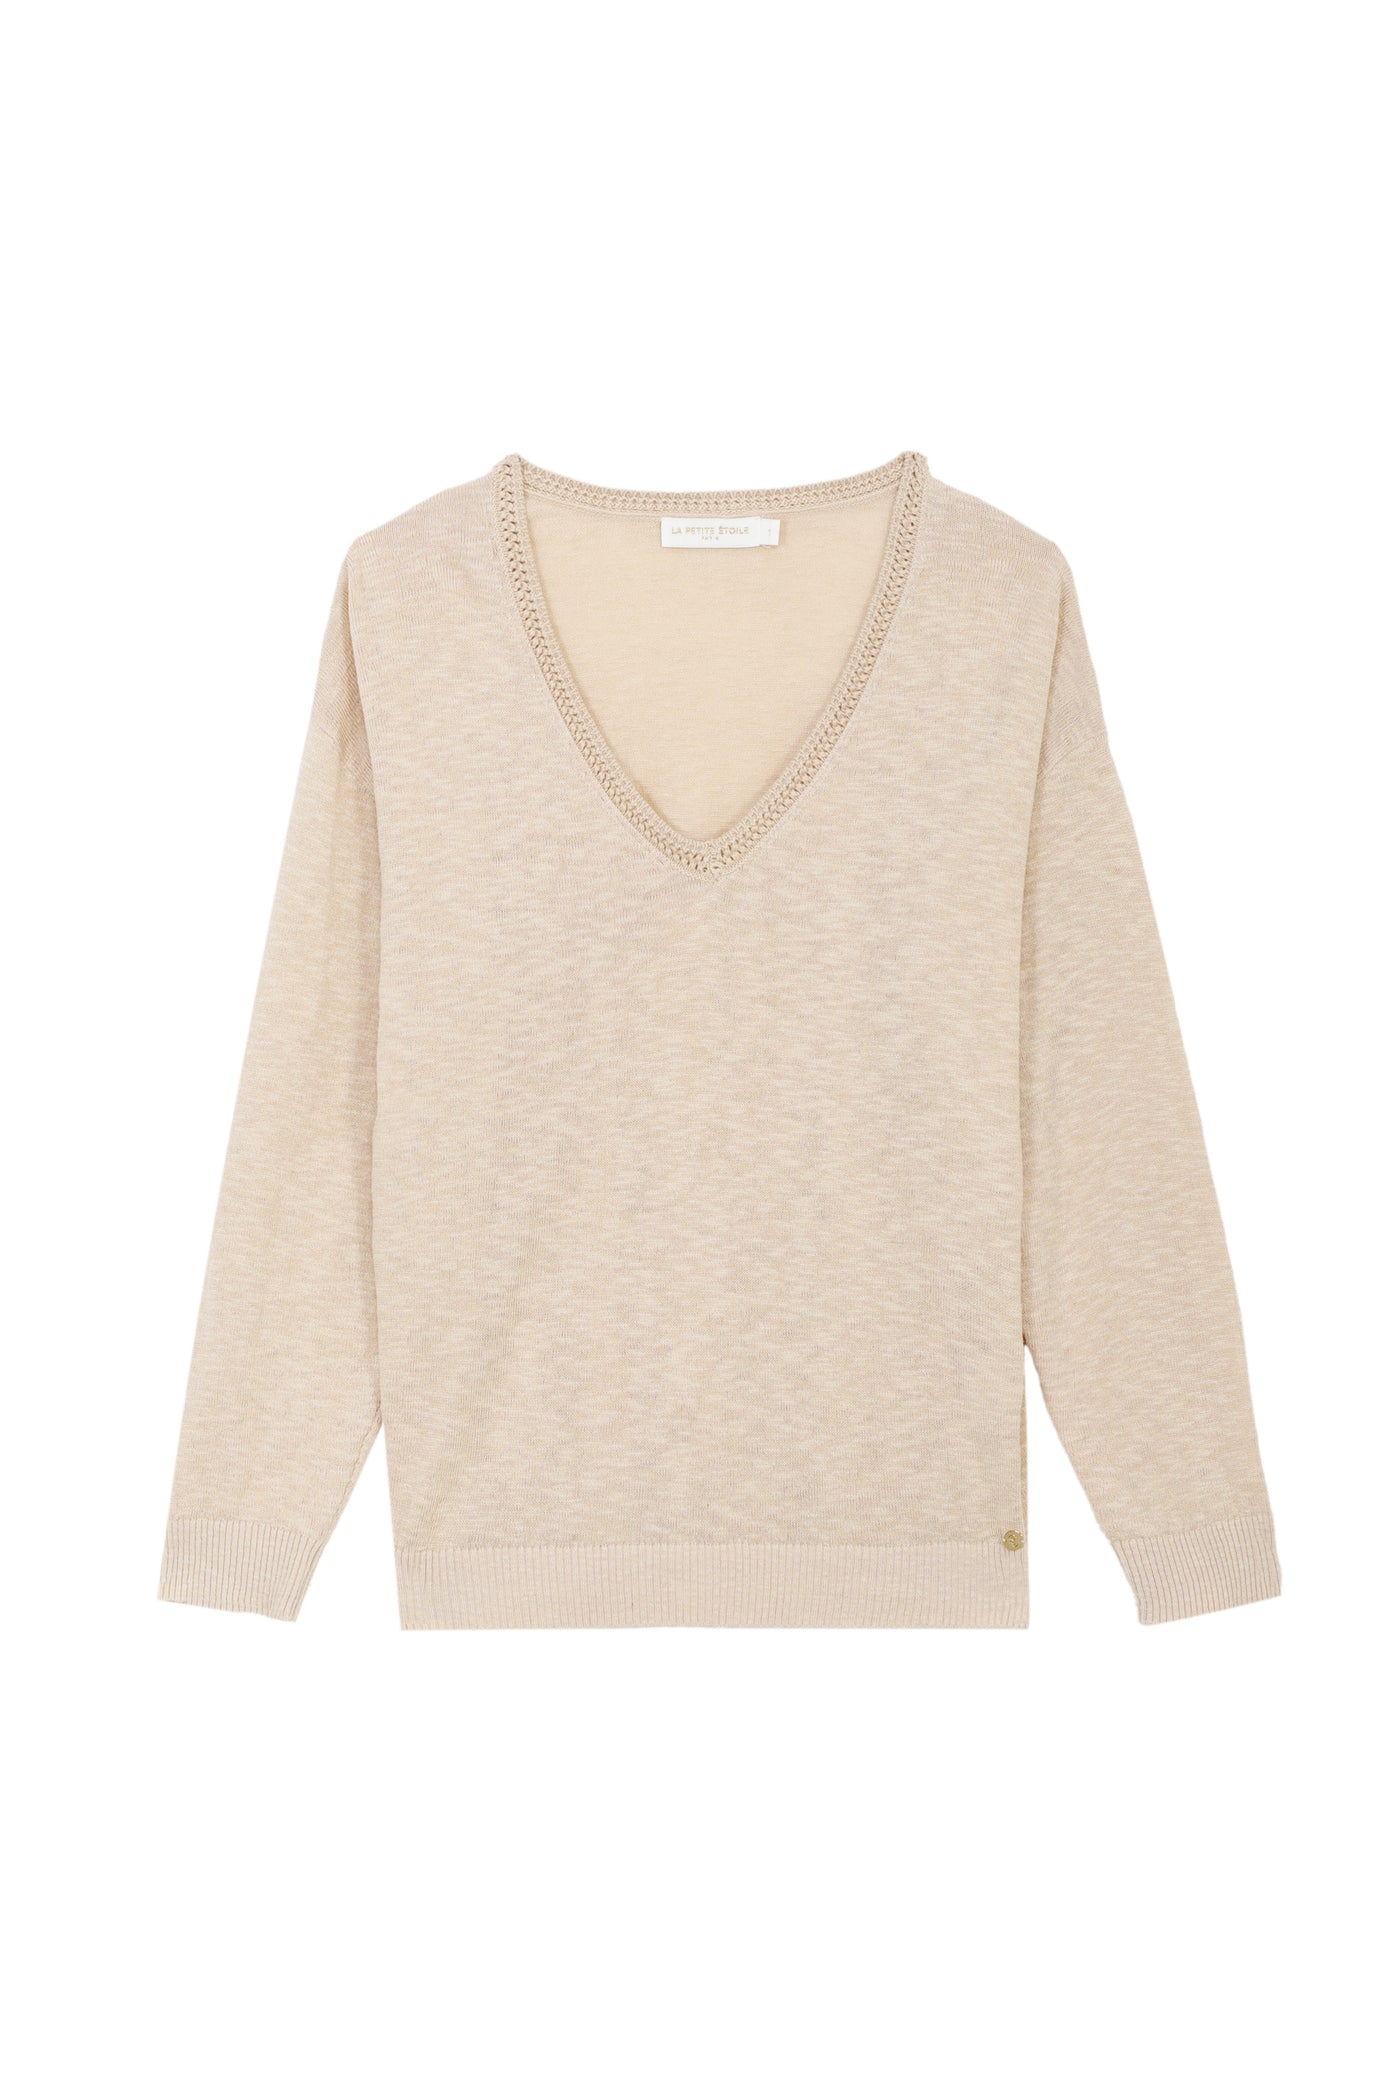 Pull Maddly - Beige